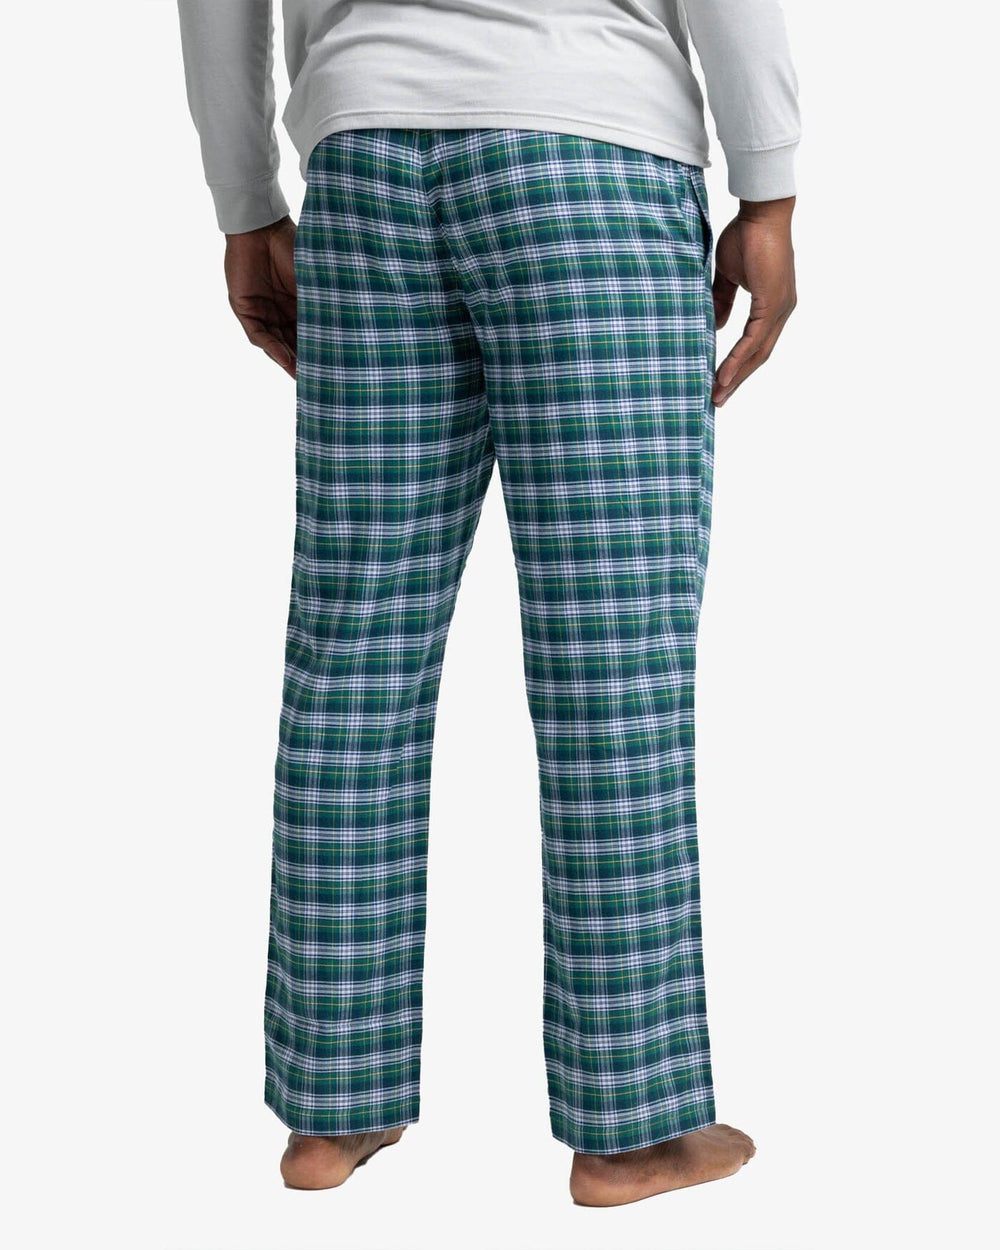 The back view of the Southern Tide Highmark Plaid Lounge Pant by Southern Tide - Georgian Bay Green